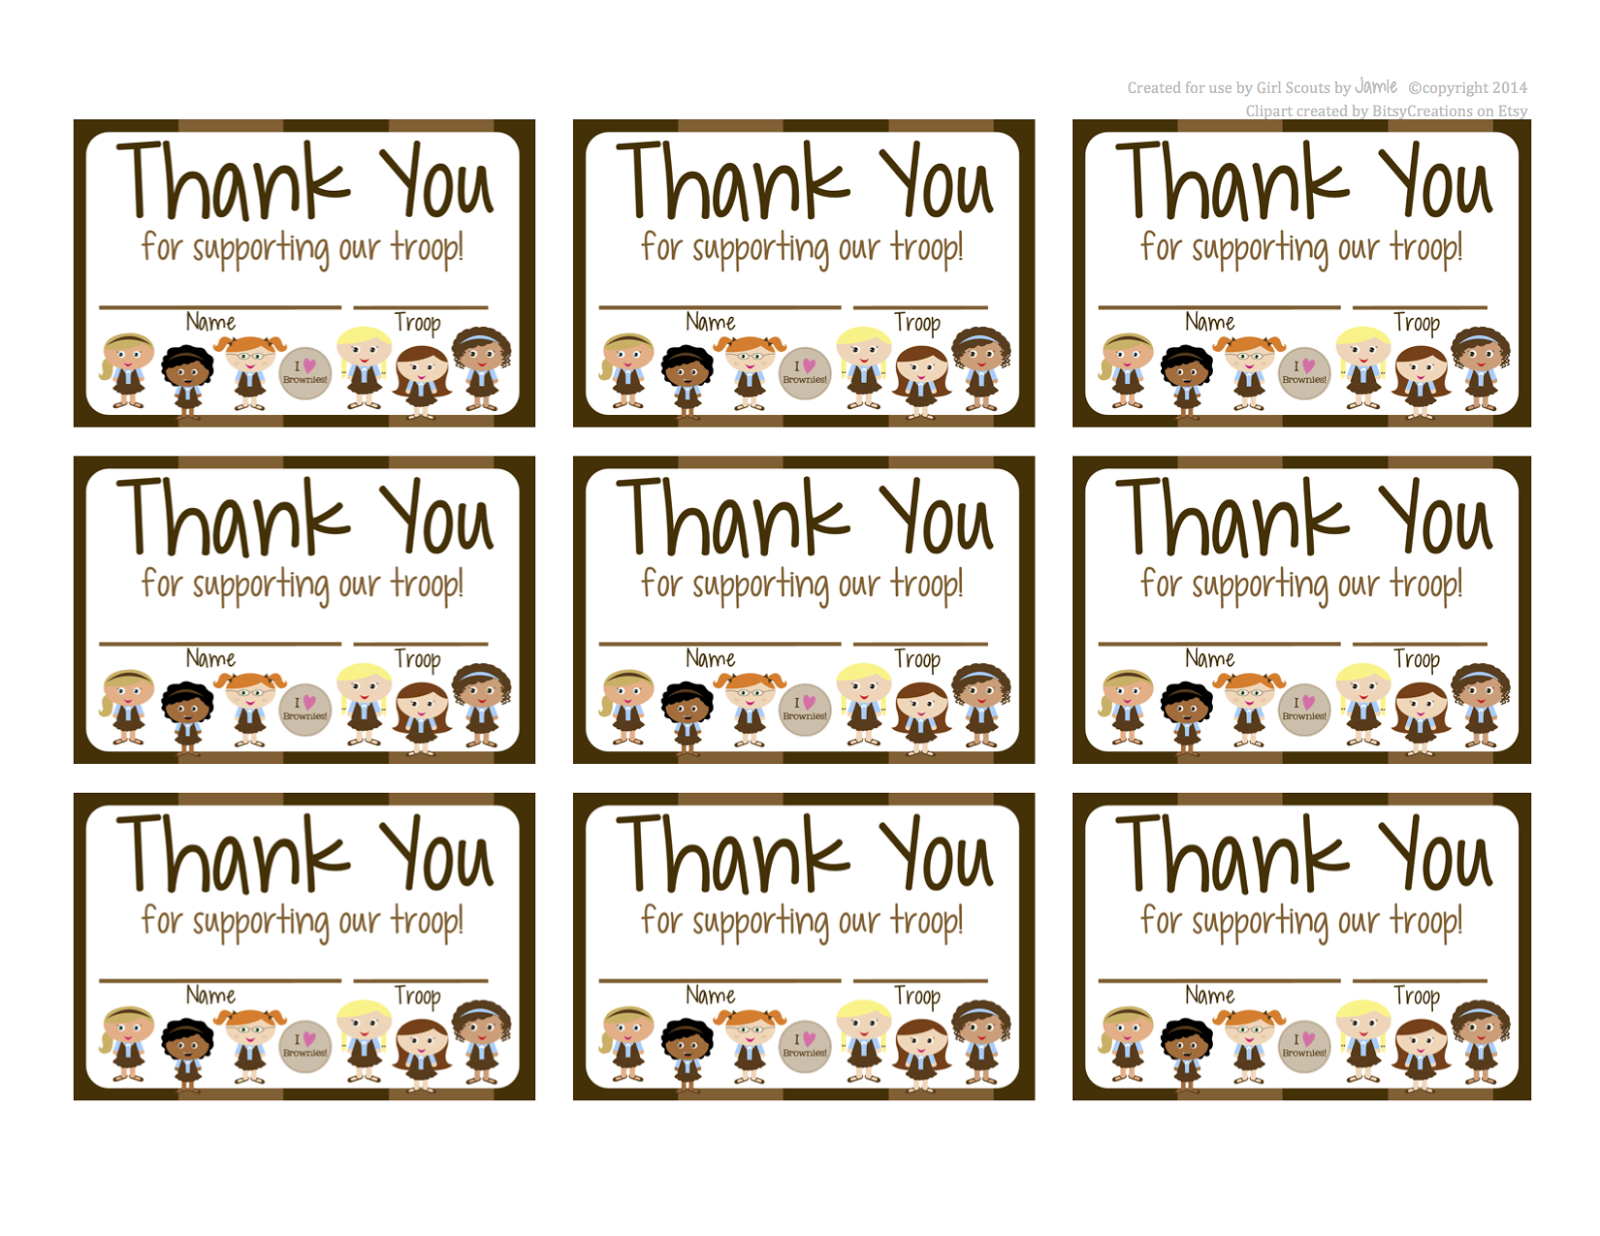 fashionable-moms-girl-scouts-brownies-free-printable-thank-you-cards